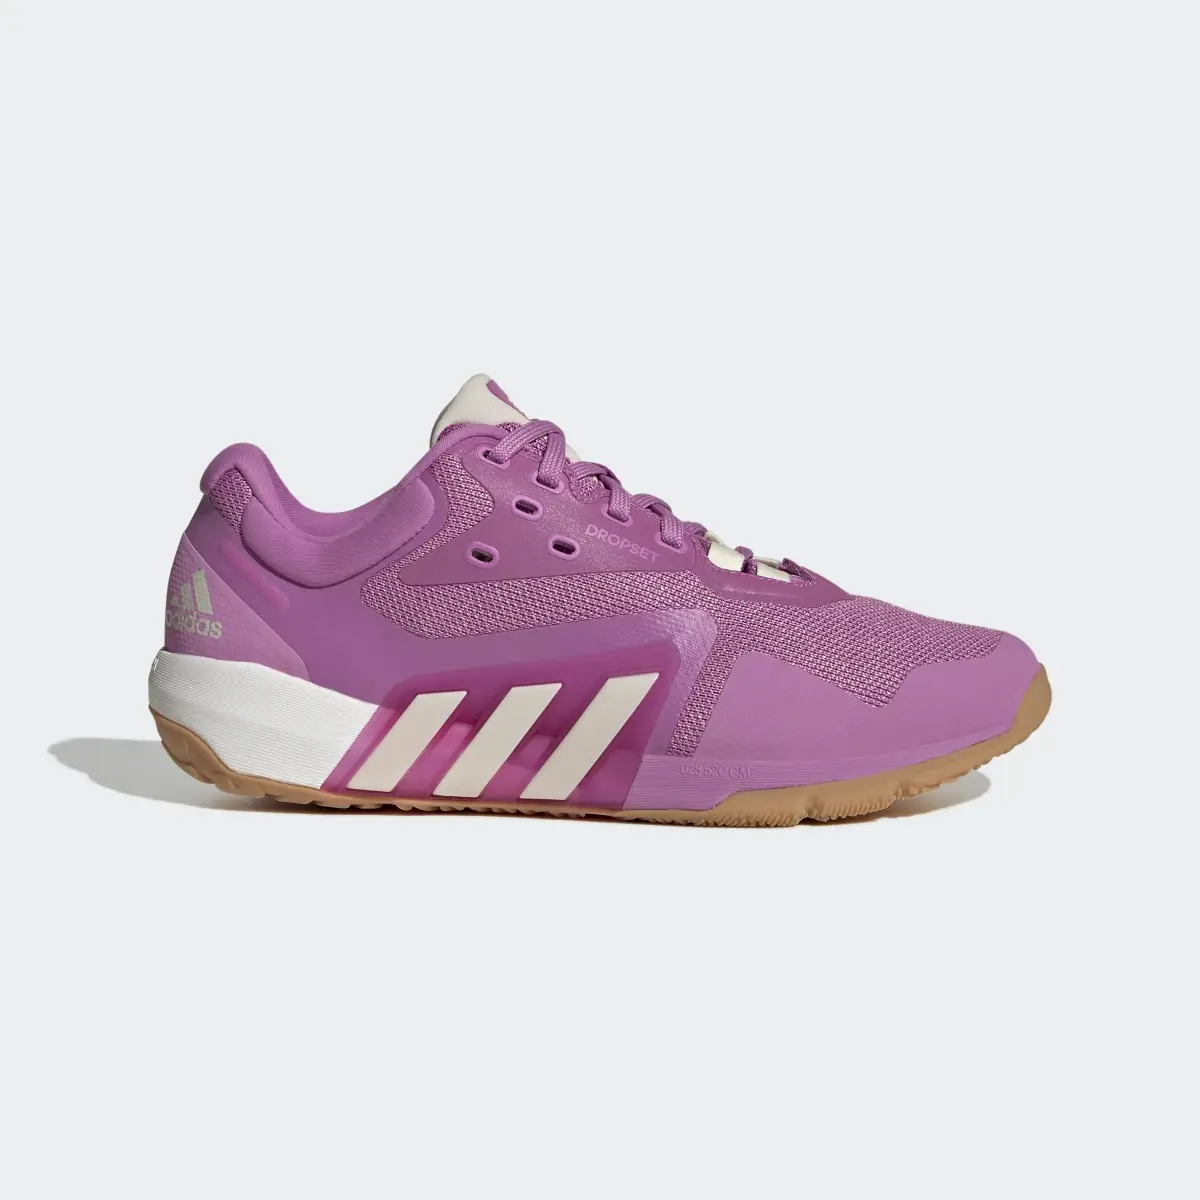 Adidas Dropset Trainer Shoes. 2